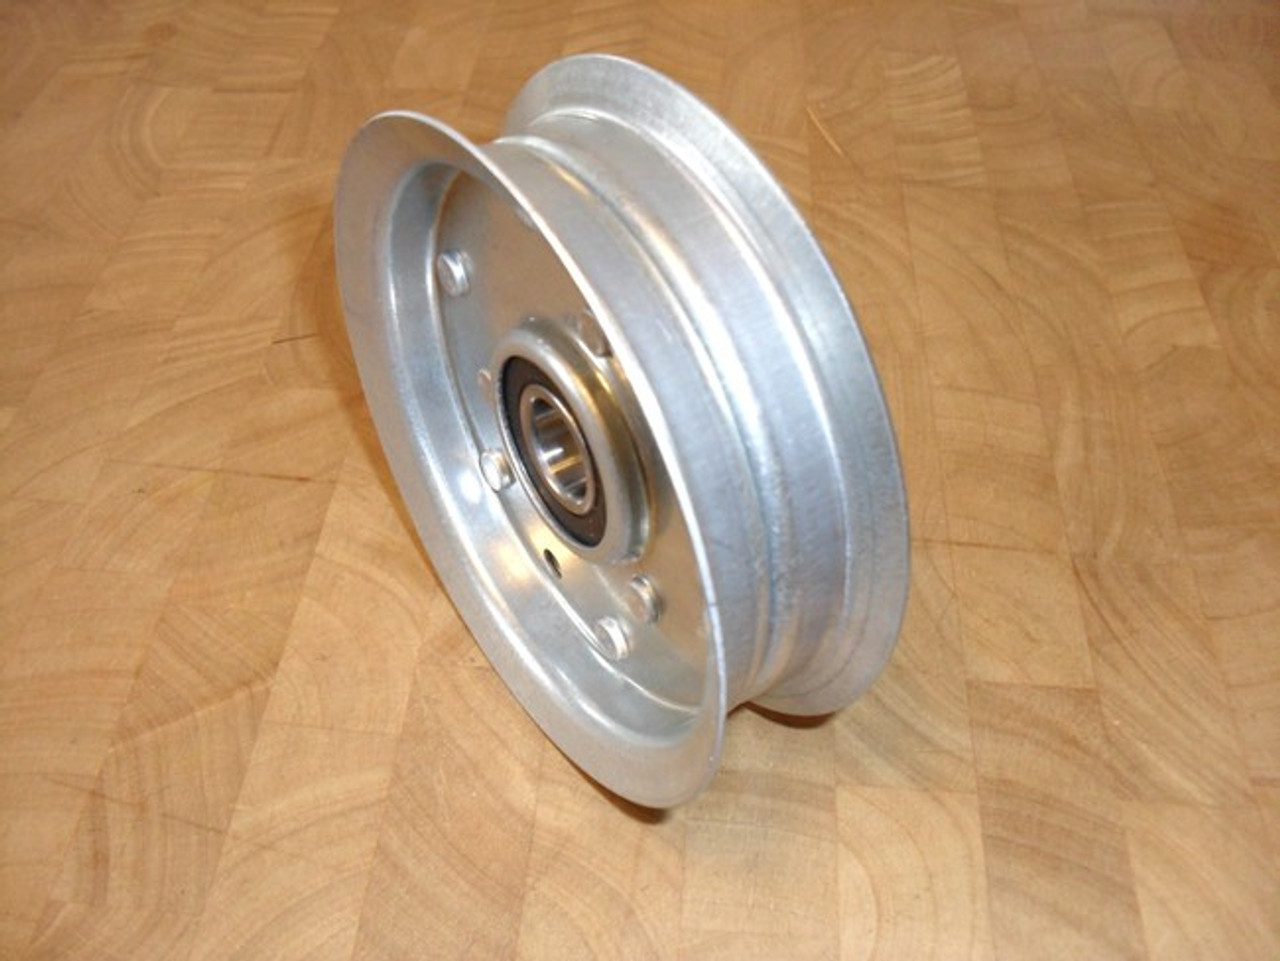 Deck Idler Pulley for Murray 38", 40", 42", 46" Cut 690387, 690387MA, O.D: 4-11/16" Height: 1-3/8" I.D: 11/16"